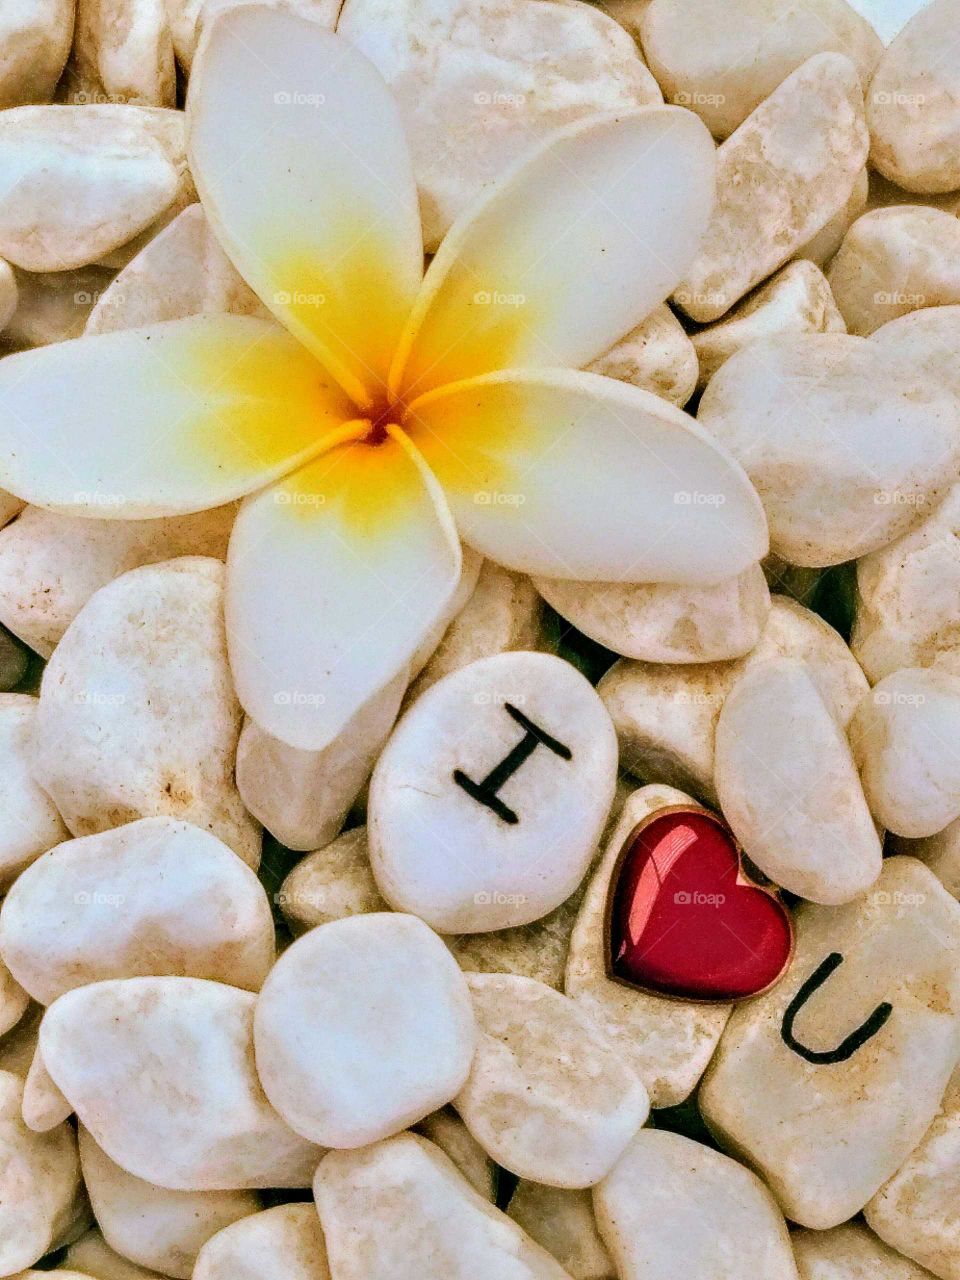 Frangipani flower on pebble background with heart